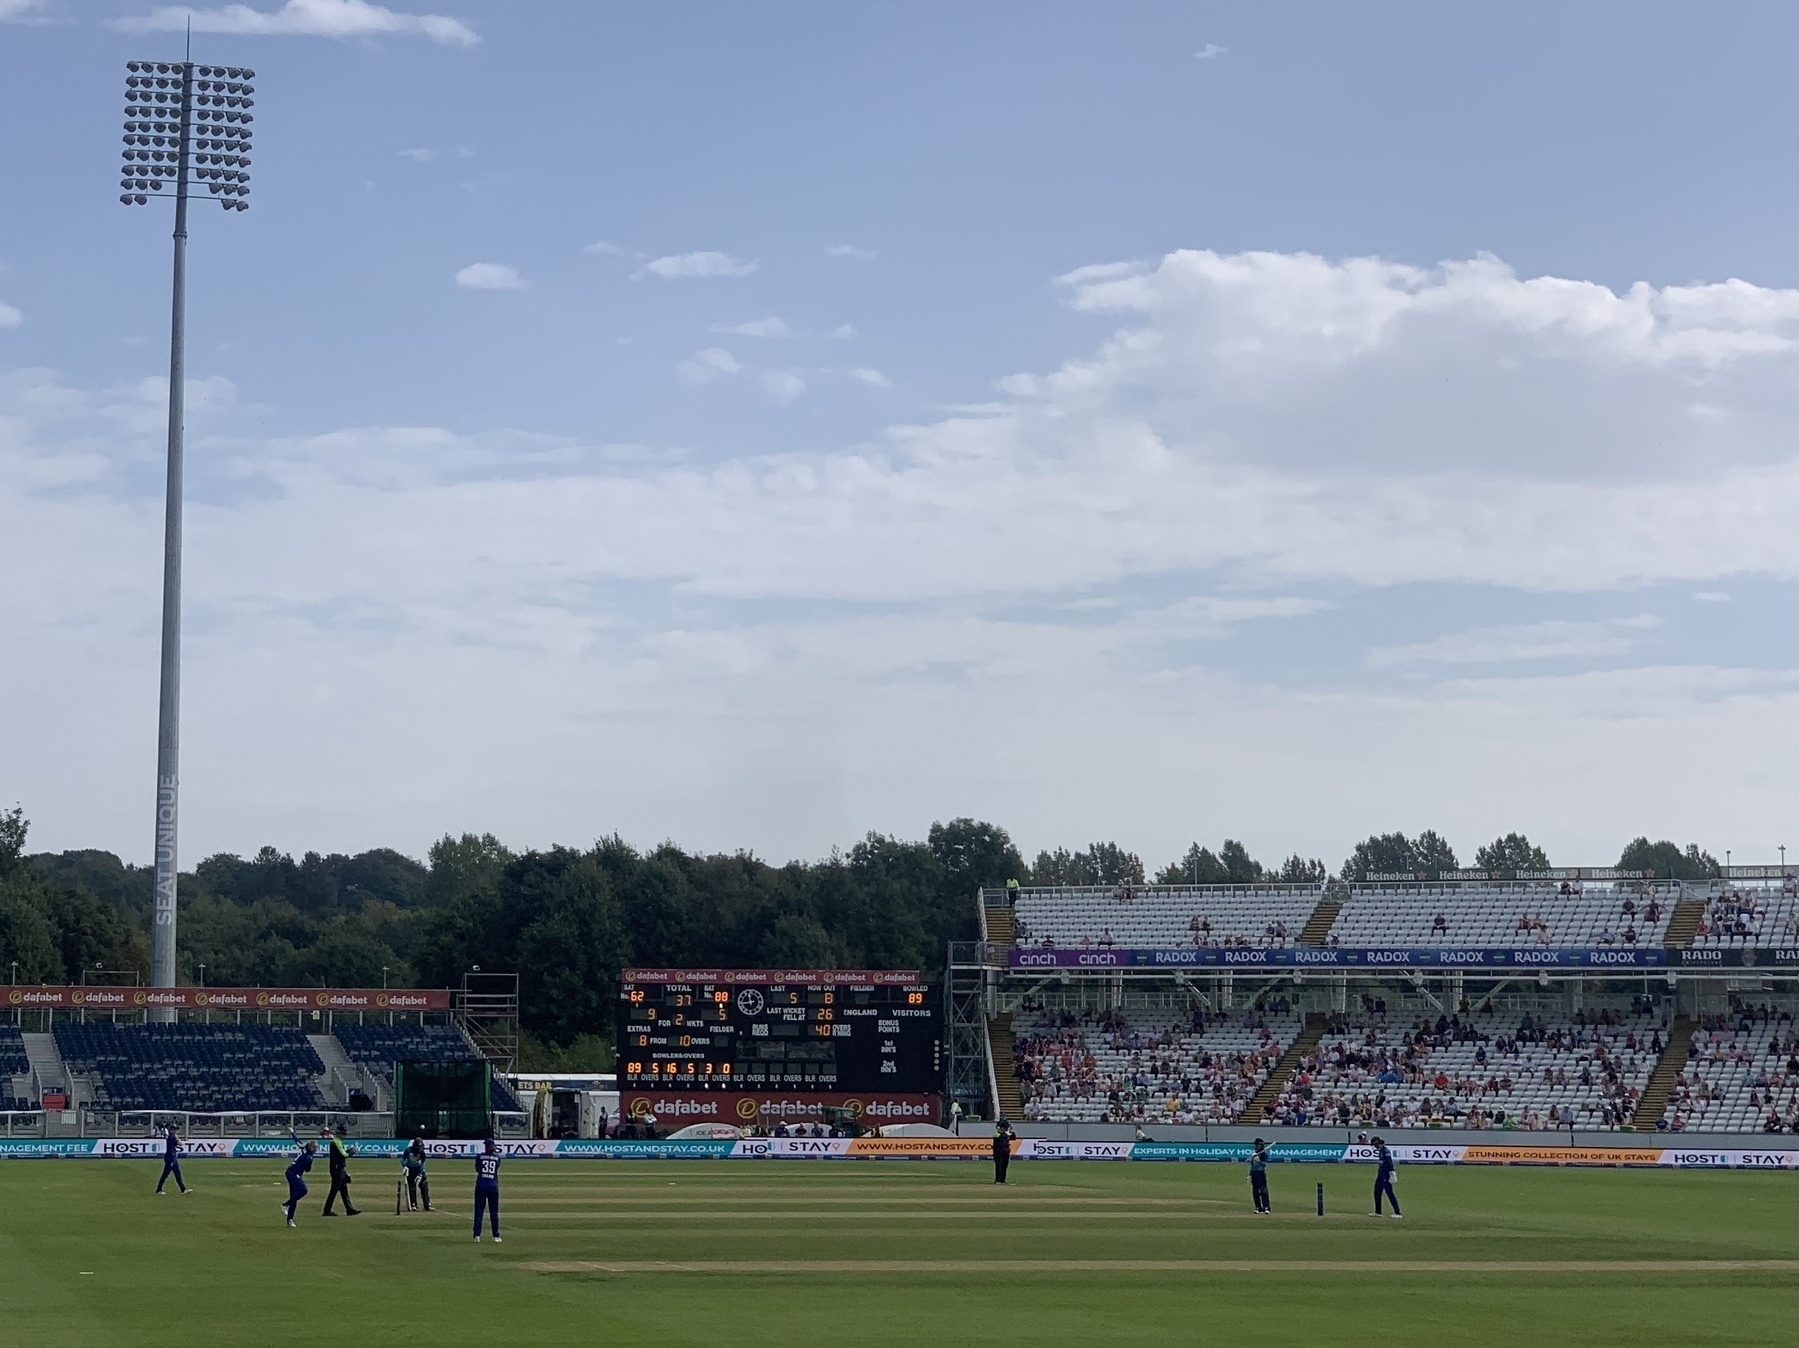 England and Sri Lanka on the cricket field at Chester le Street. Scoreboard and stands in the background.